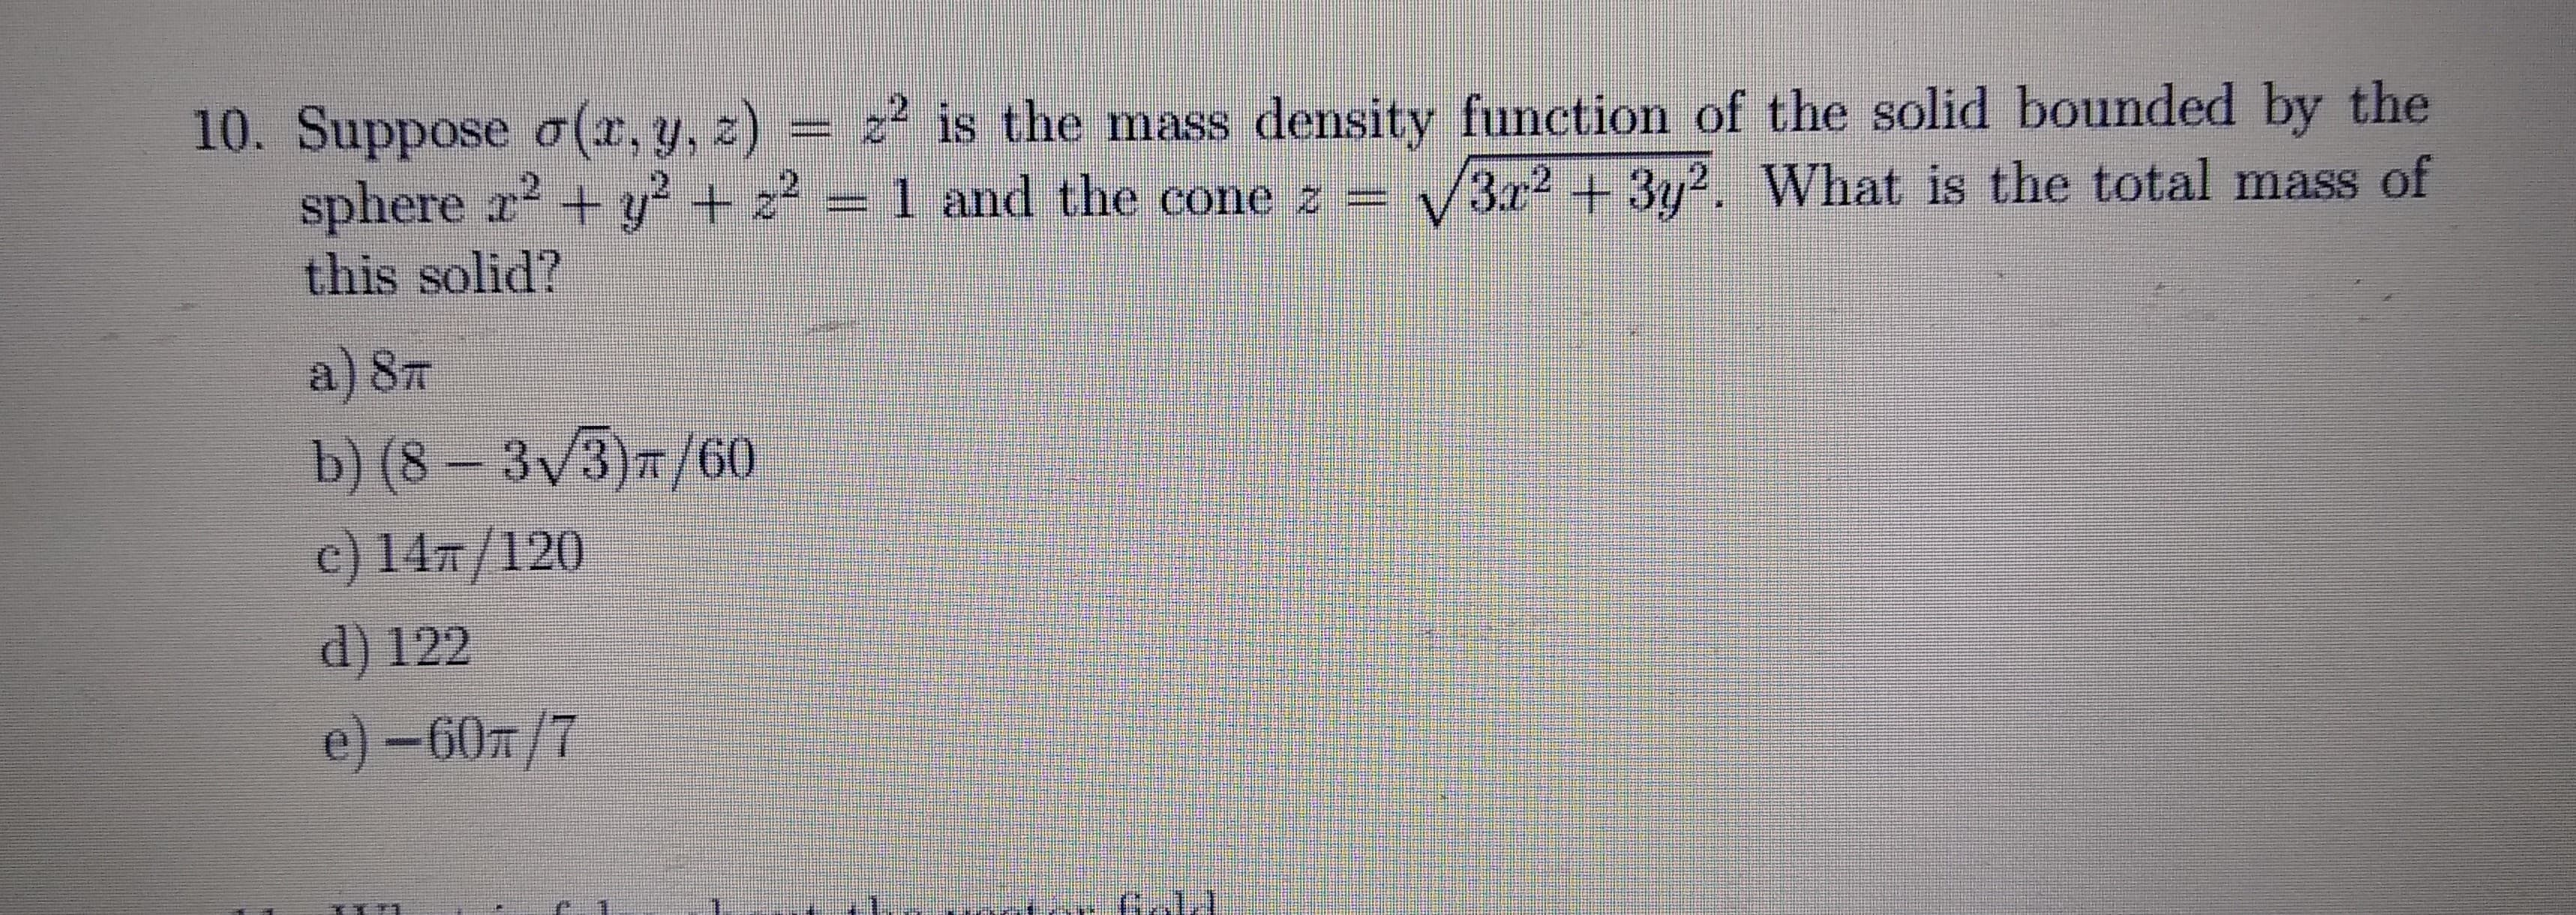 Suppose a(x, y, z) = z² is the mass density function of the solid bounded by the
sphere a? + y4 2?=1 and the cone z = B 3y? What is the total mass of
this solid?
a)8T
b) (8 – 3/3 =/60,
c) 147/120.
d) 122
e)-60/7
